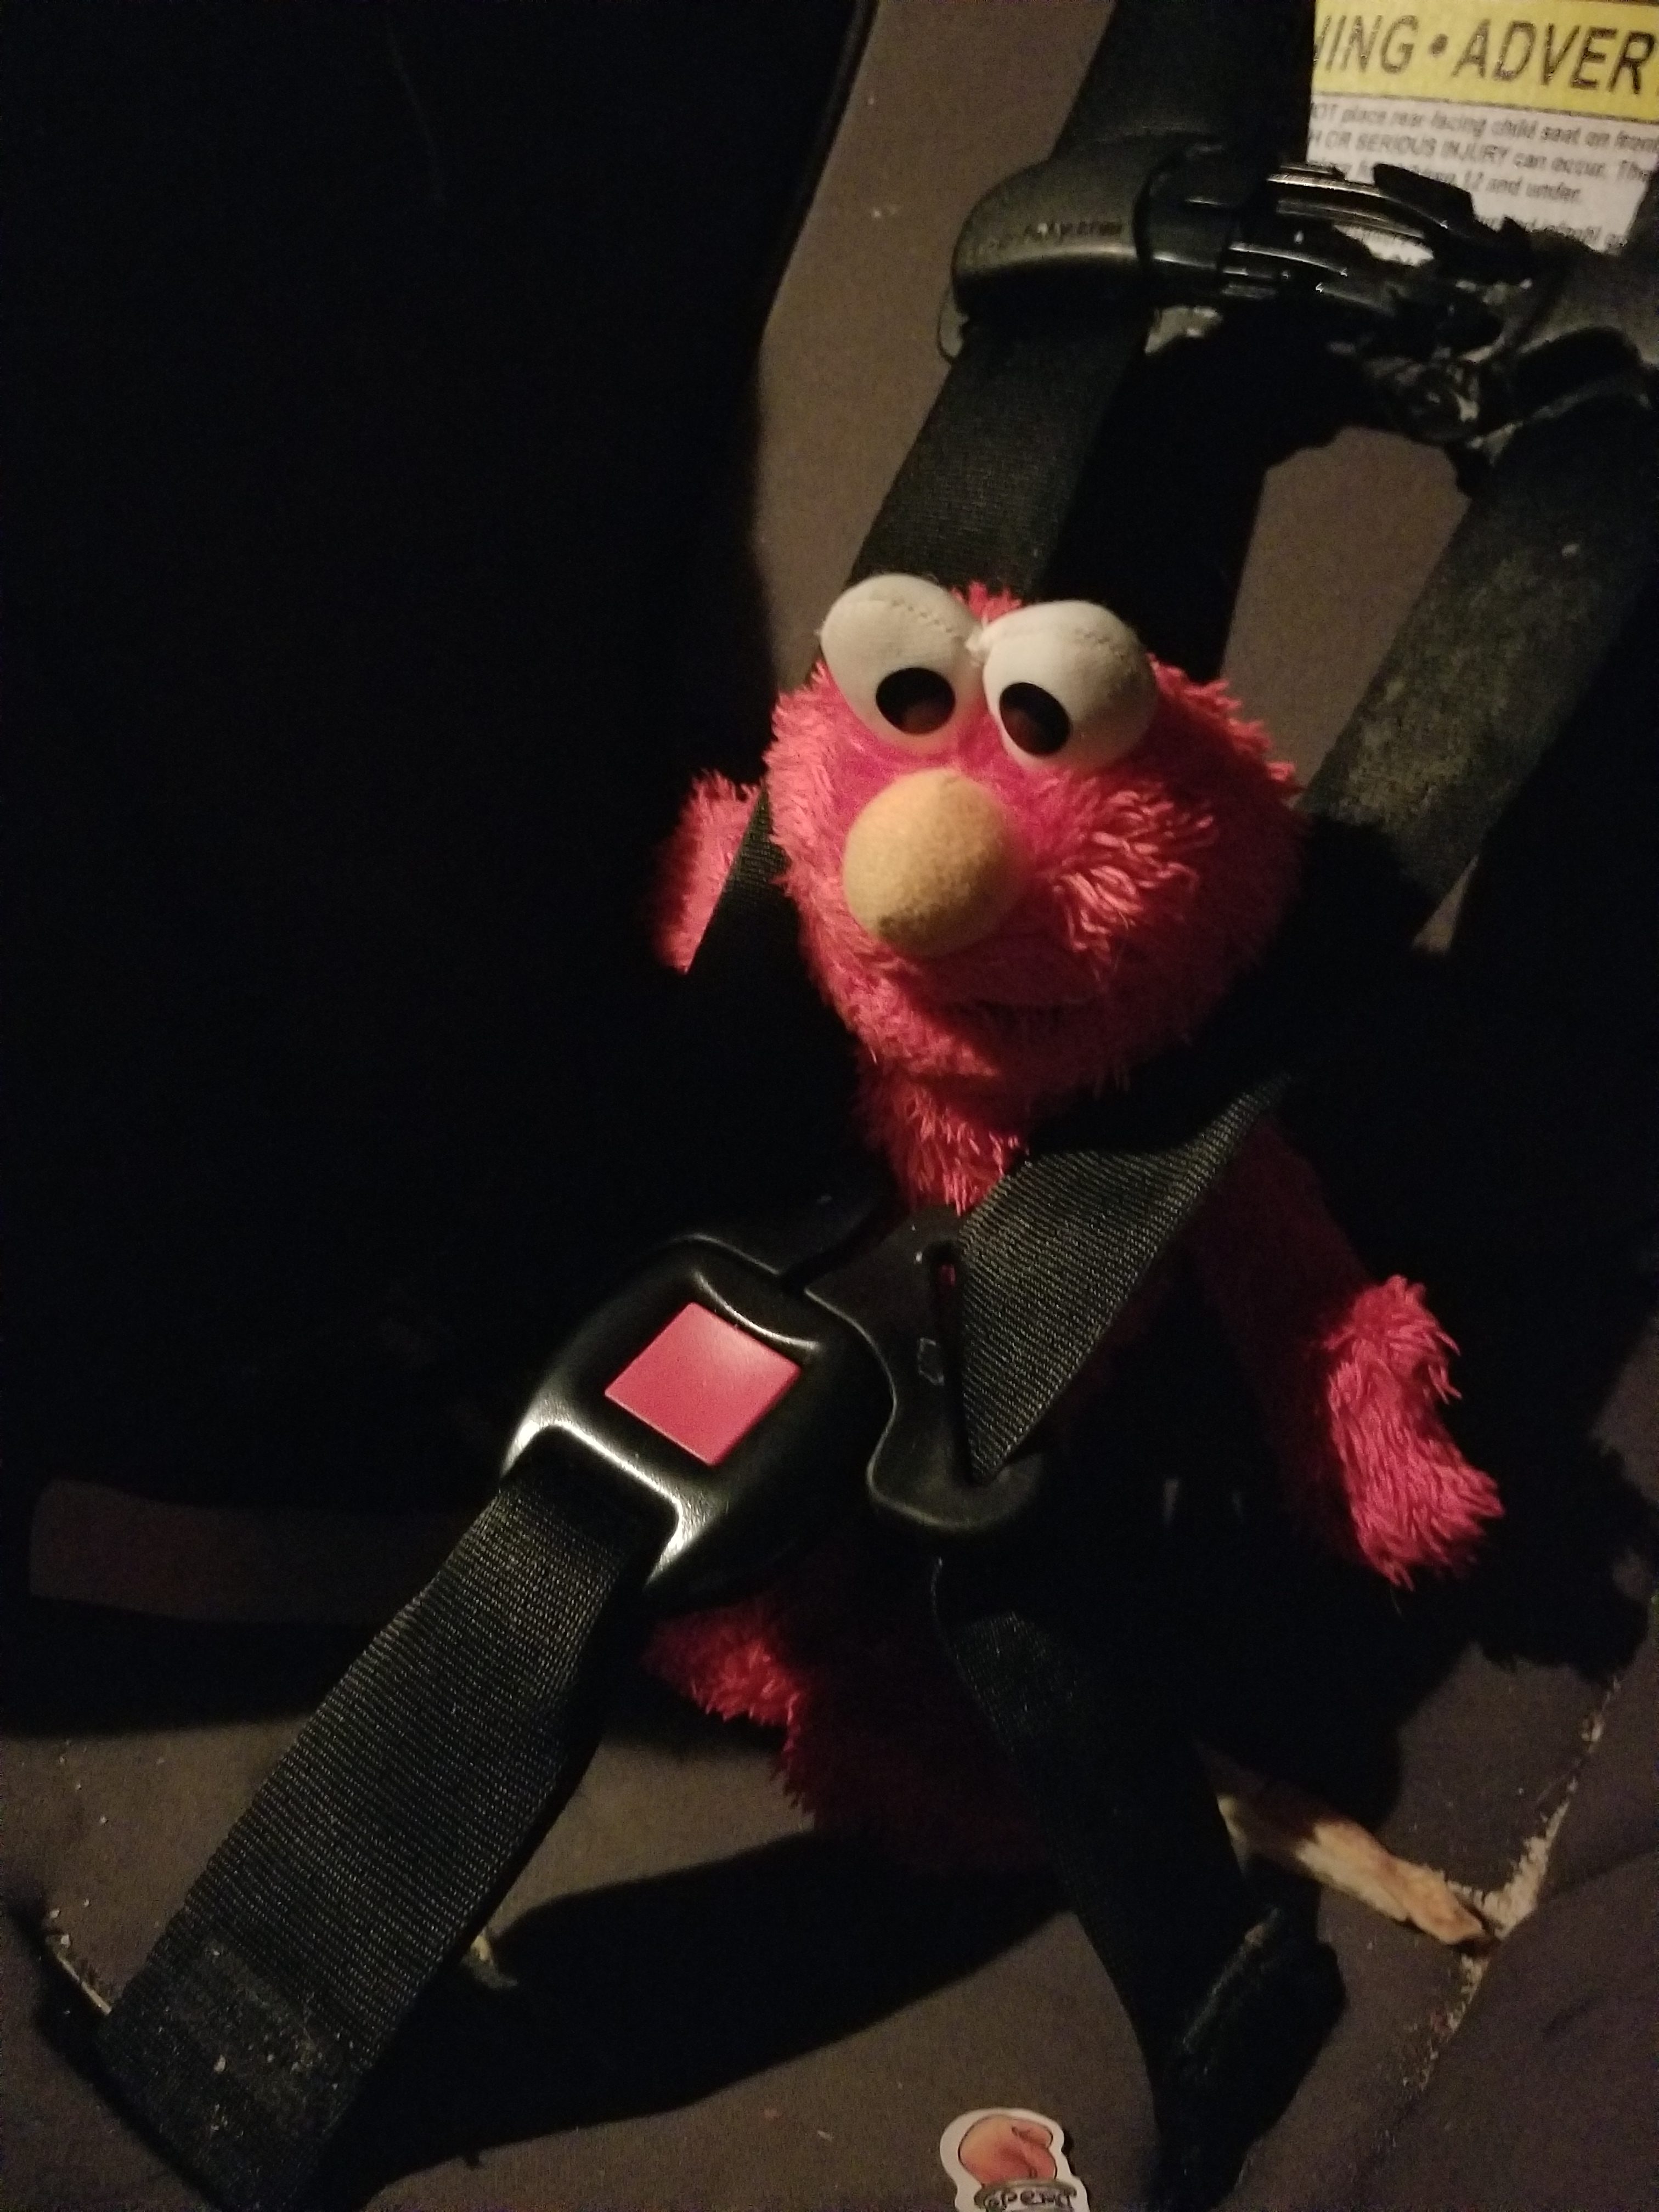 Elmo missed Iva so much, he wants to ride back home in her seat.